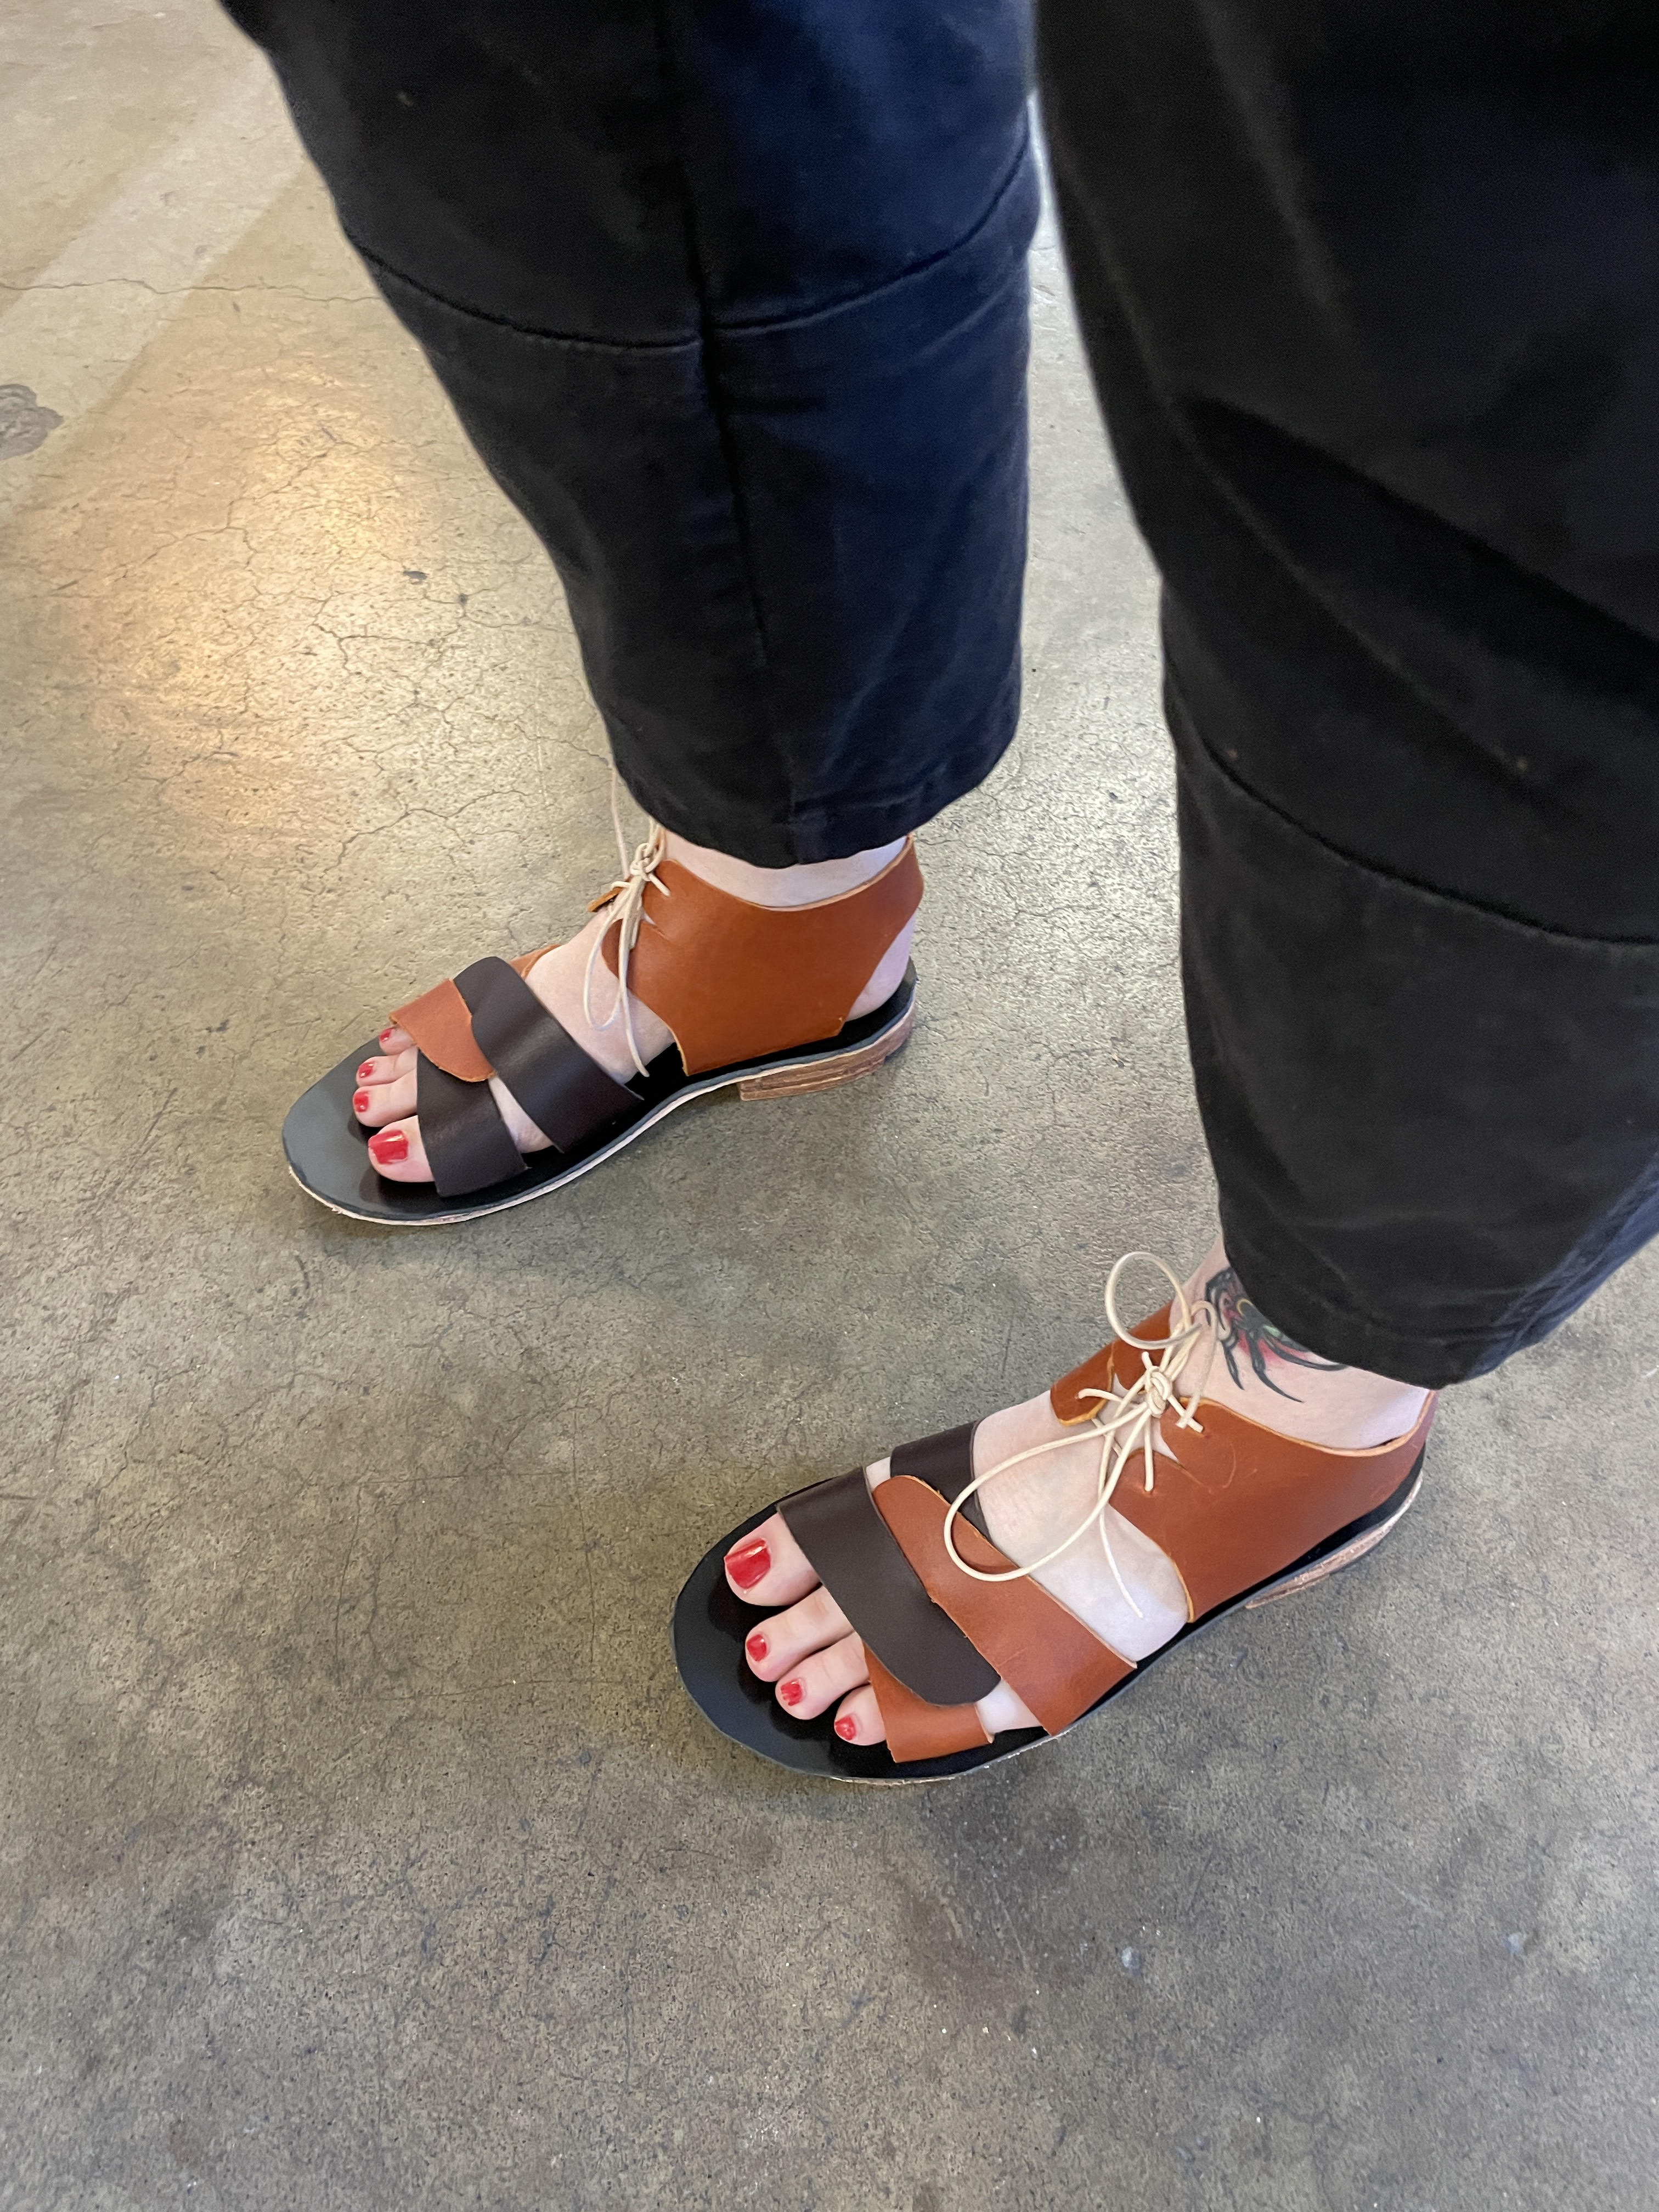 AUG 4th IN-PERSON - Sandal Making Workshop with Rachel Corry